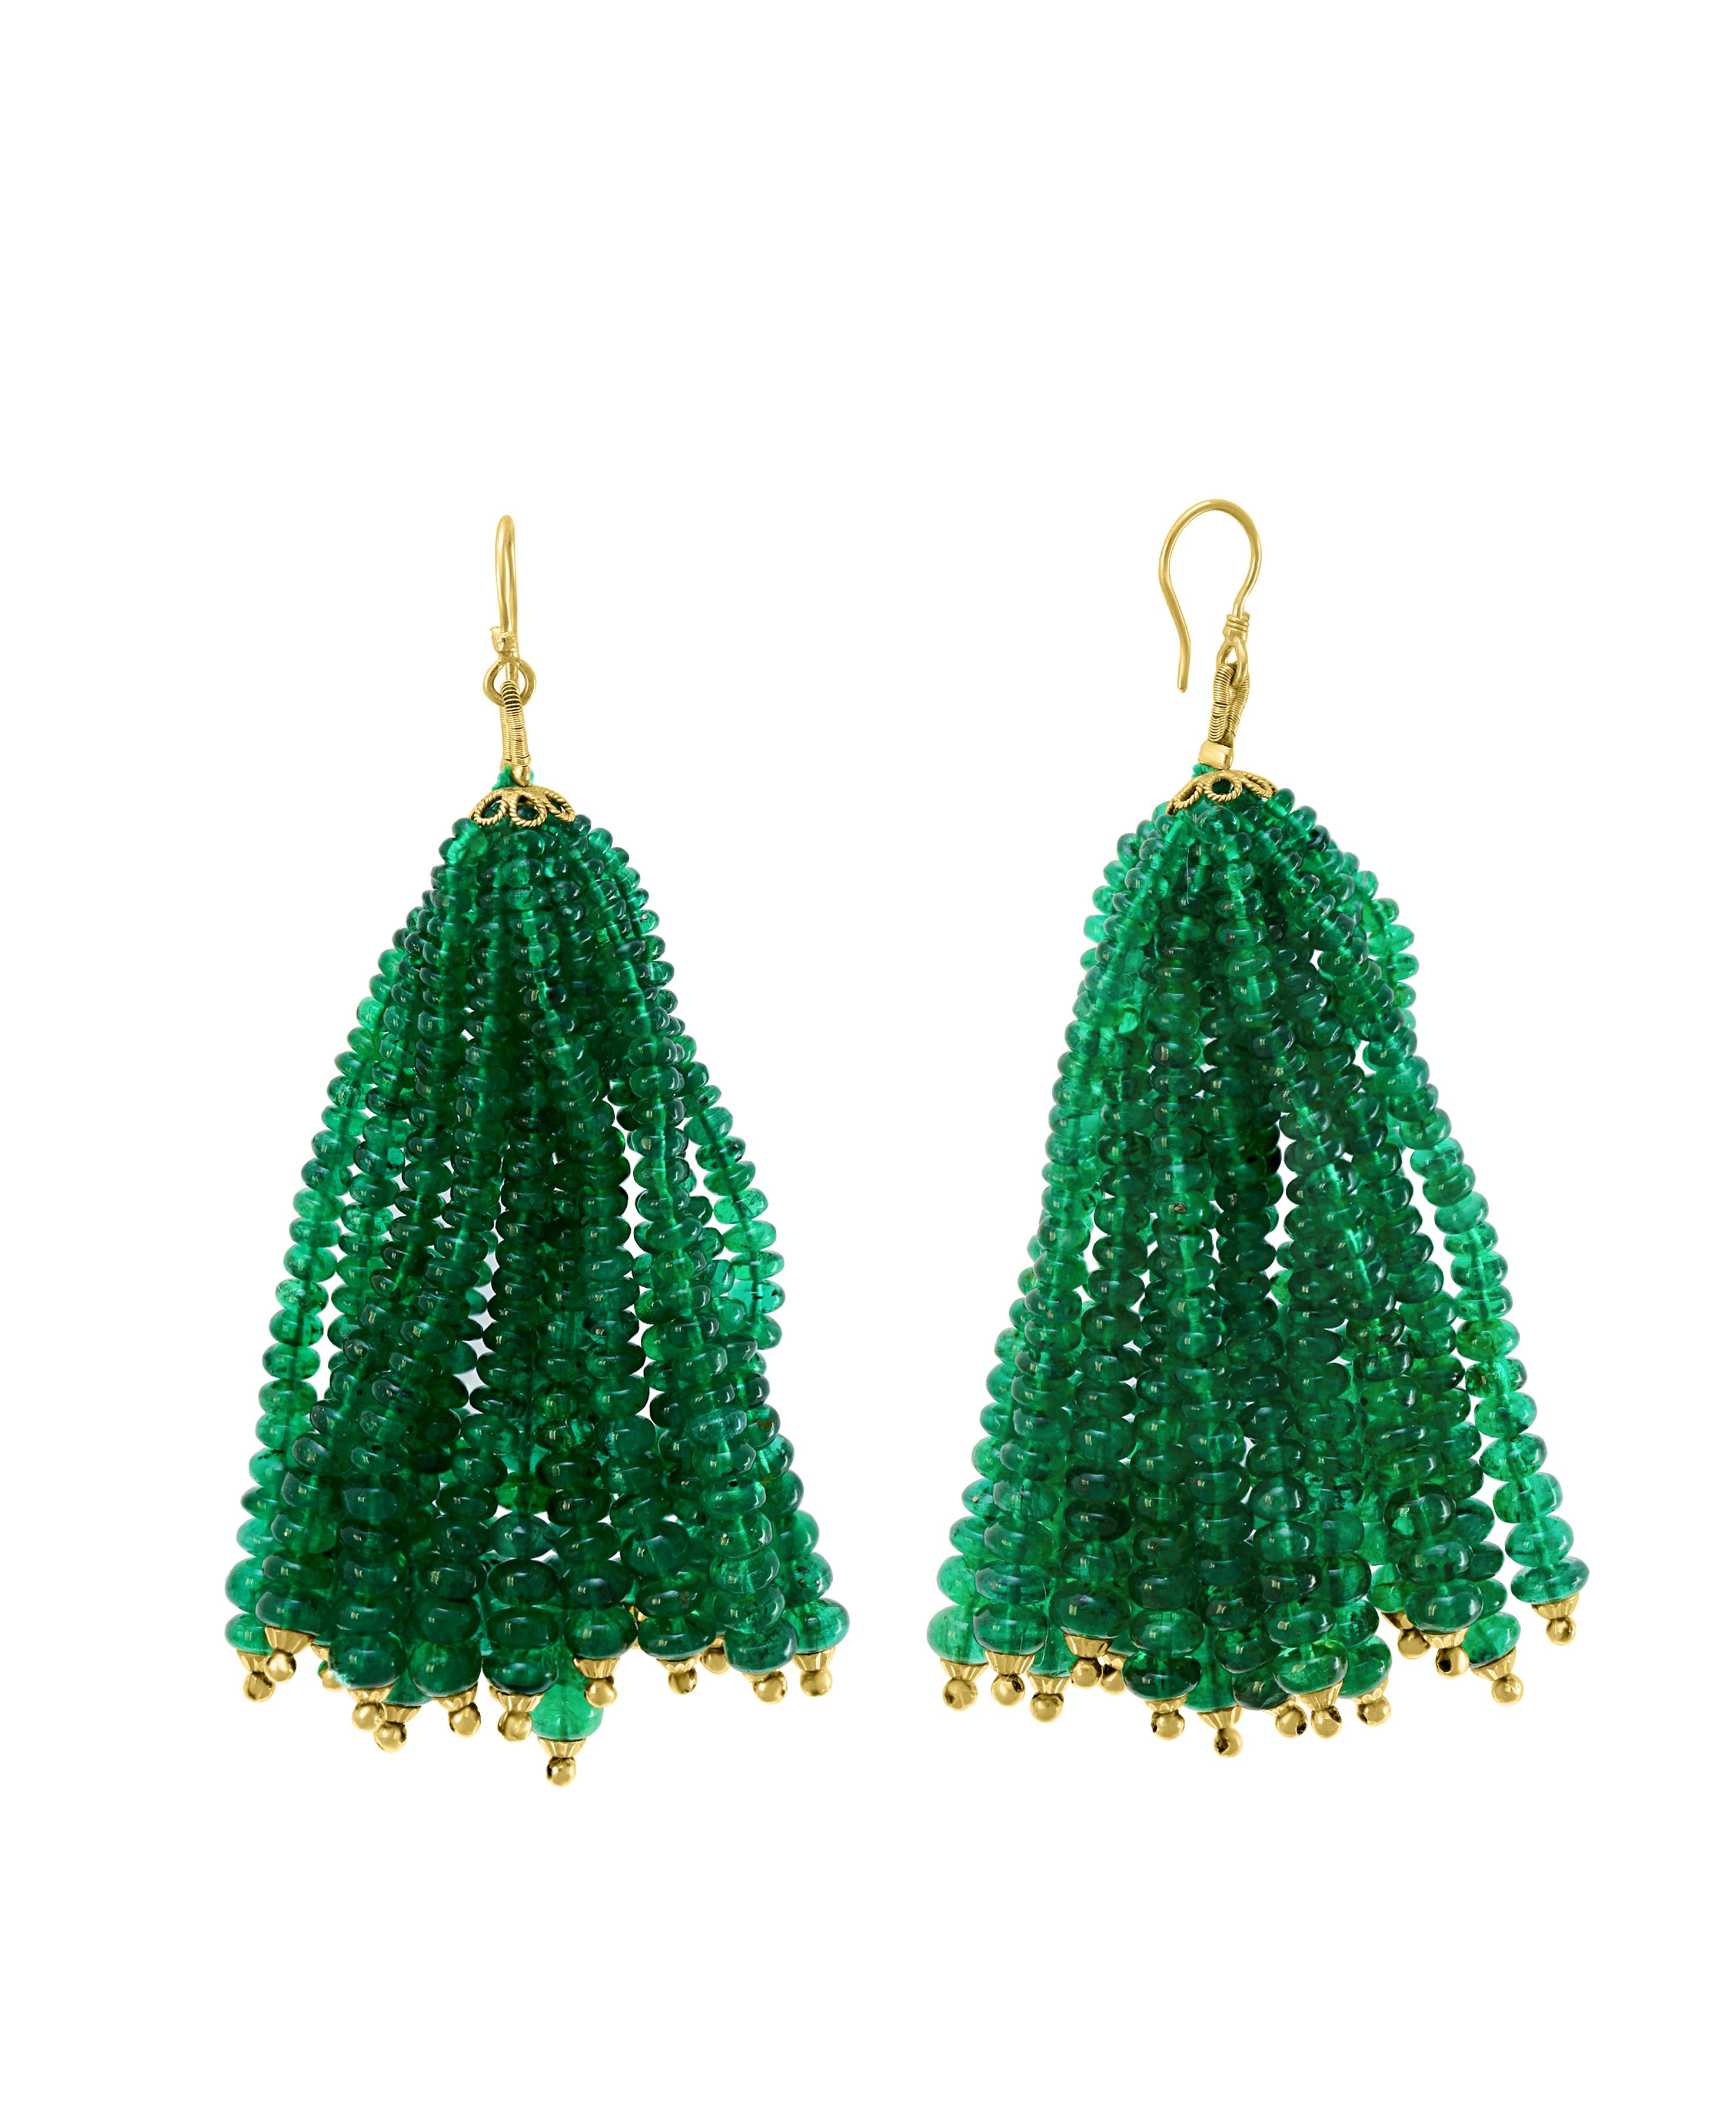 
198 Carats Emerald Beads   Hanging Earrings  18 Karat Gold.
This exquisite pair of earrings are beautifully crafted with 18 karat yellow gold  
This pair of Earrings has 198 carats of Emerald beads . Finest color and quality.
Hard to match so many